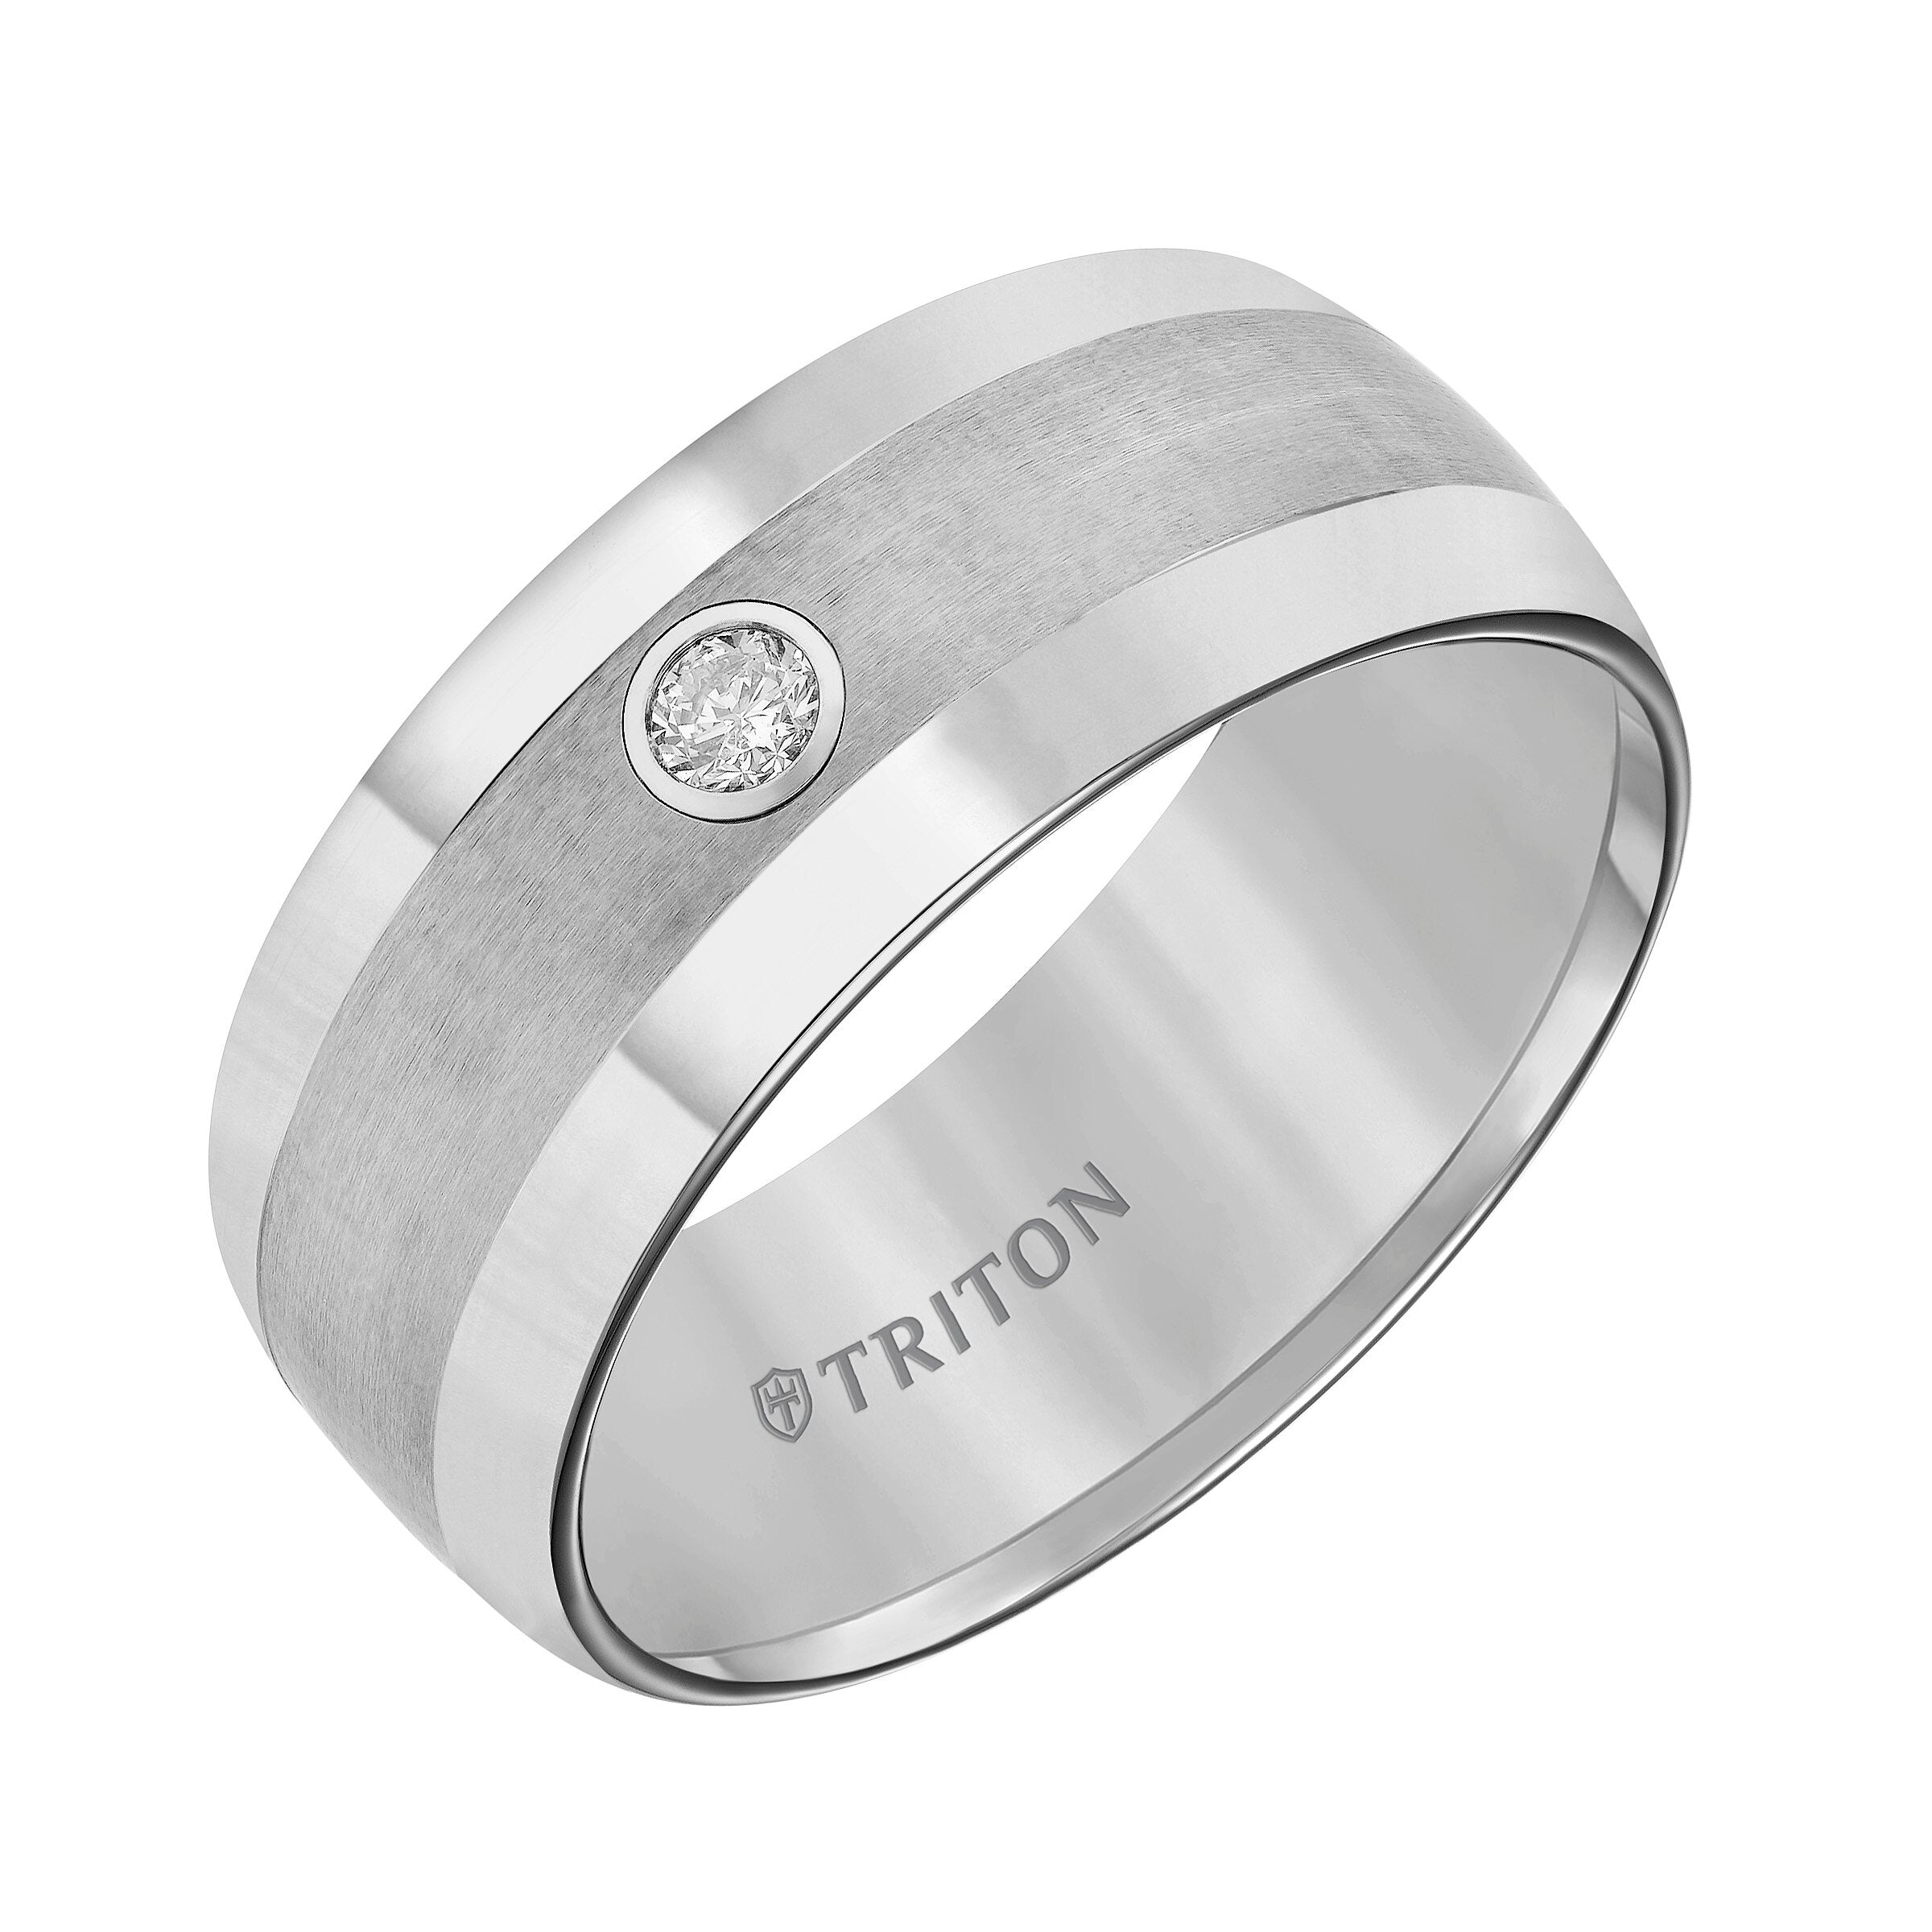 9MM Grey Tungsten Diamond Ring - Solitaire Domed Satin Center and Bevel Edge